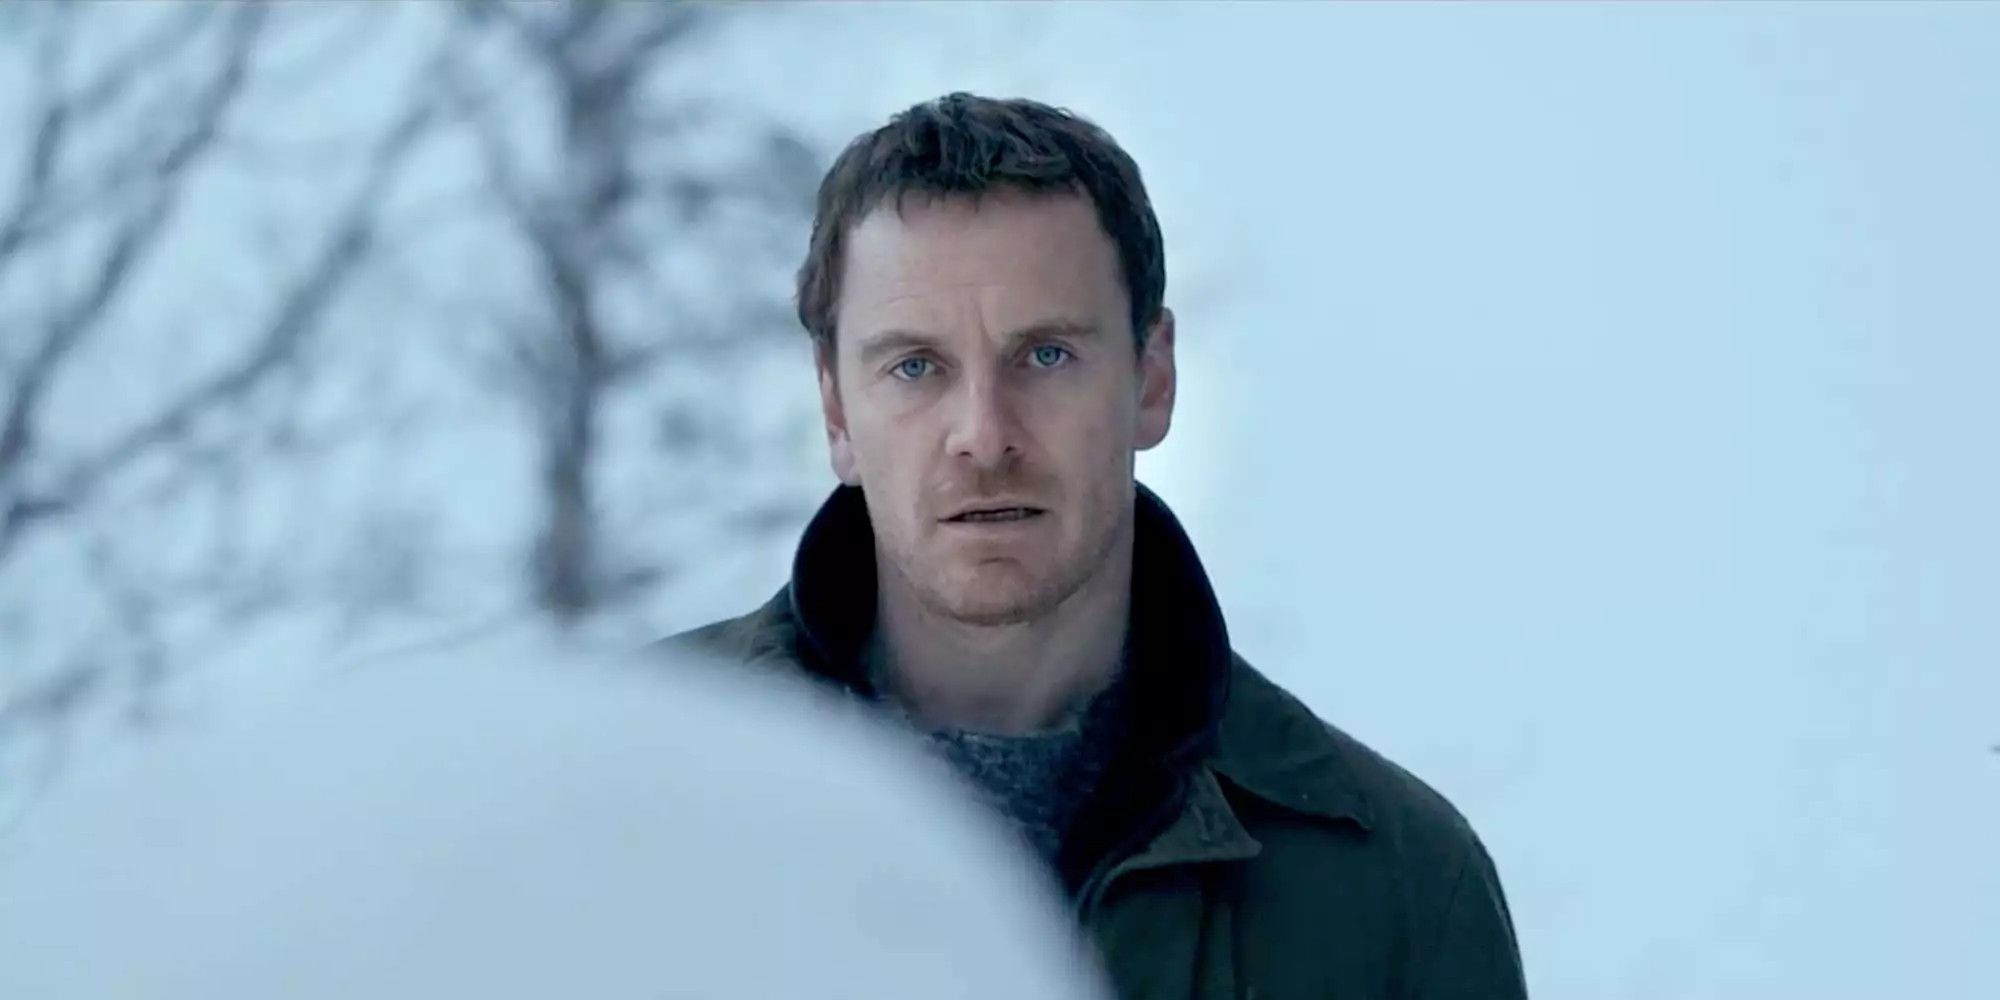 Michael Fassbender stares pensively in image from The Snowman